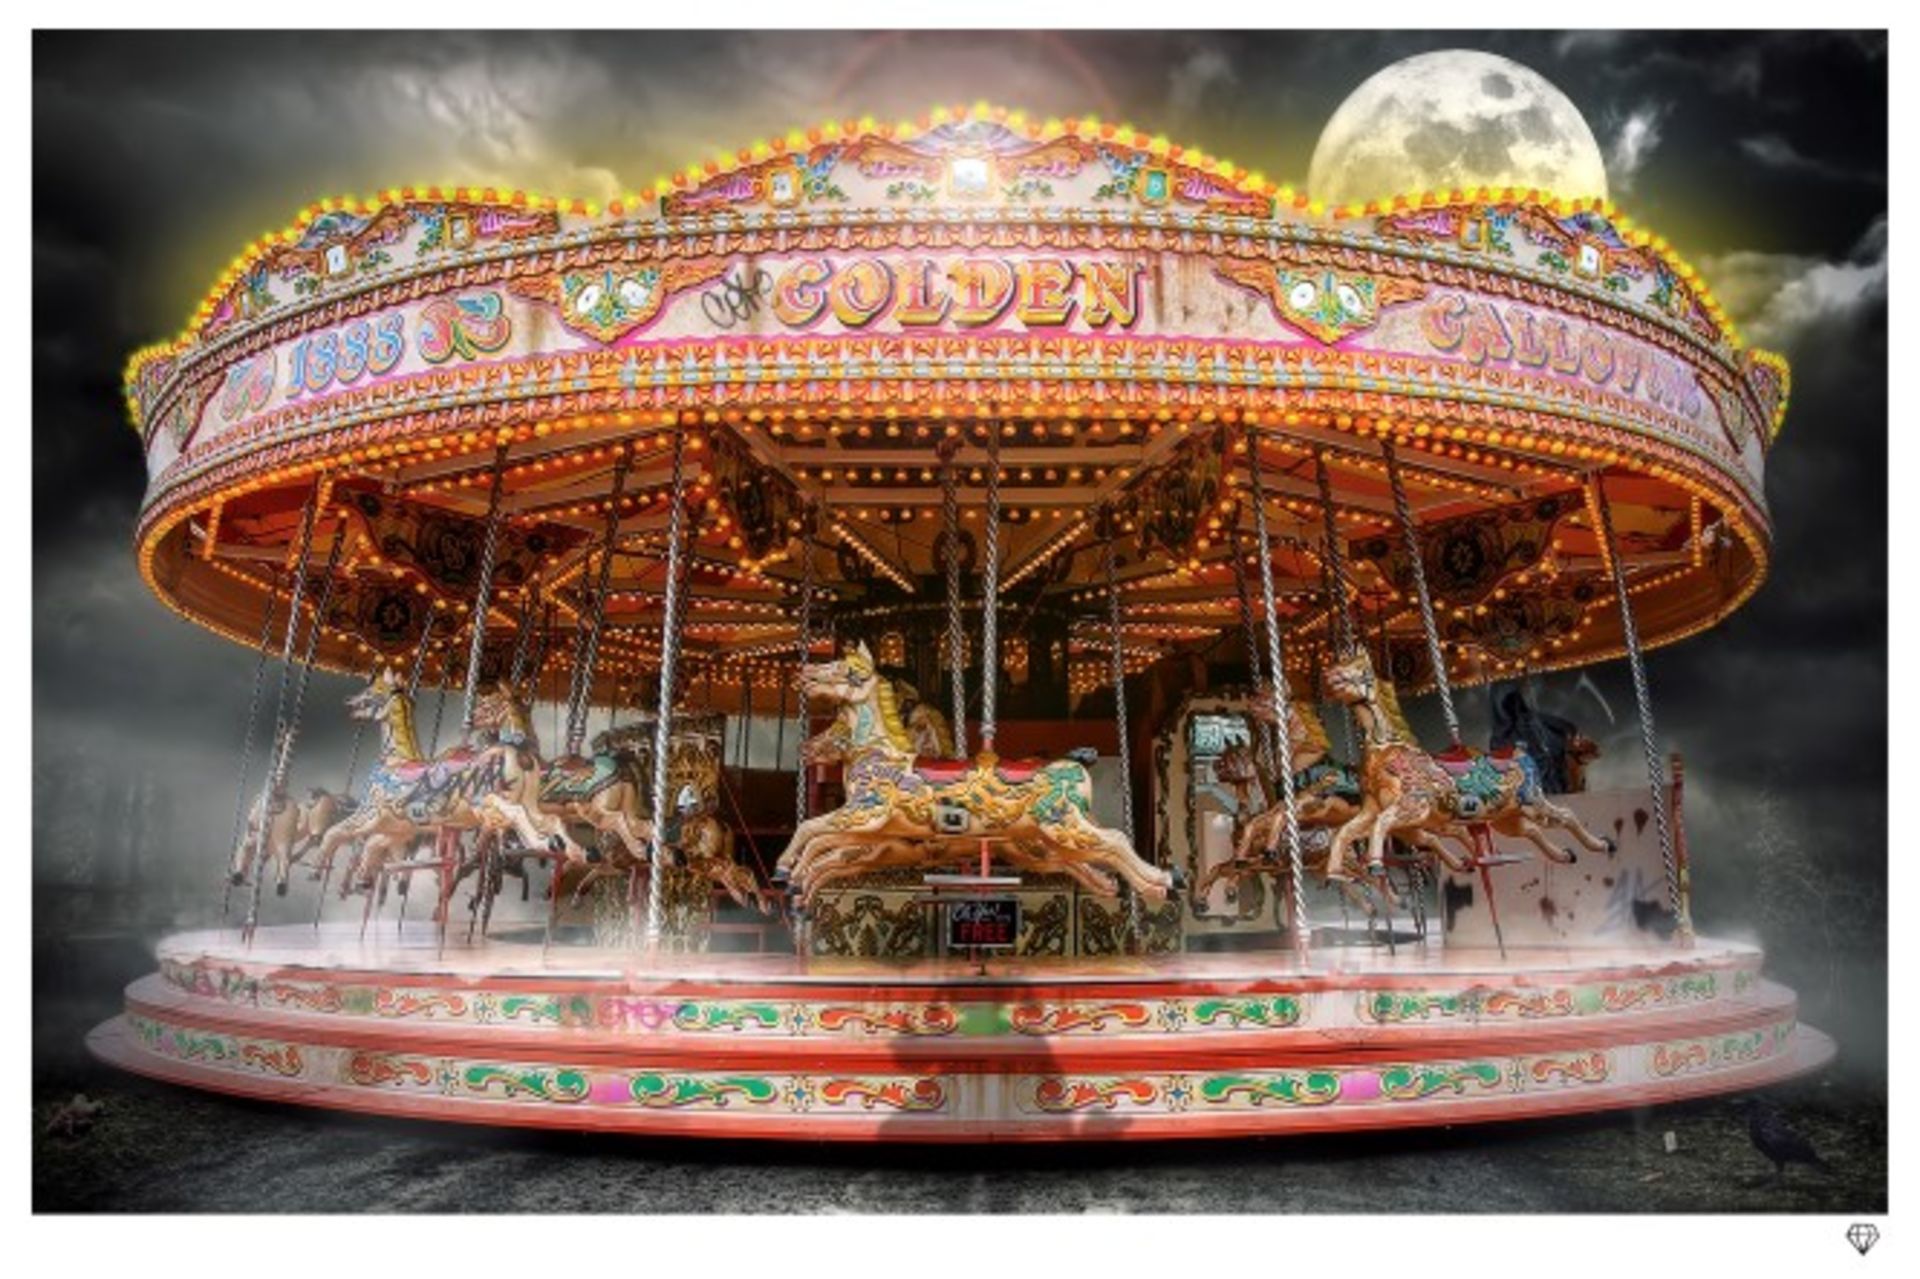 JJ Adams Ltd edition 84/195 "The Carousel",Wishbone, Framed and In Original packaging 42 x 32 Inch - Image 2 of 5